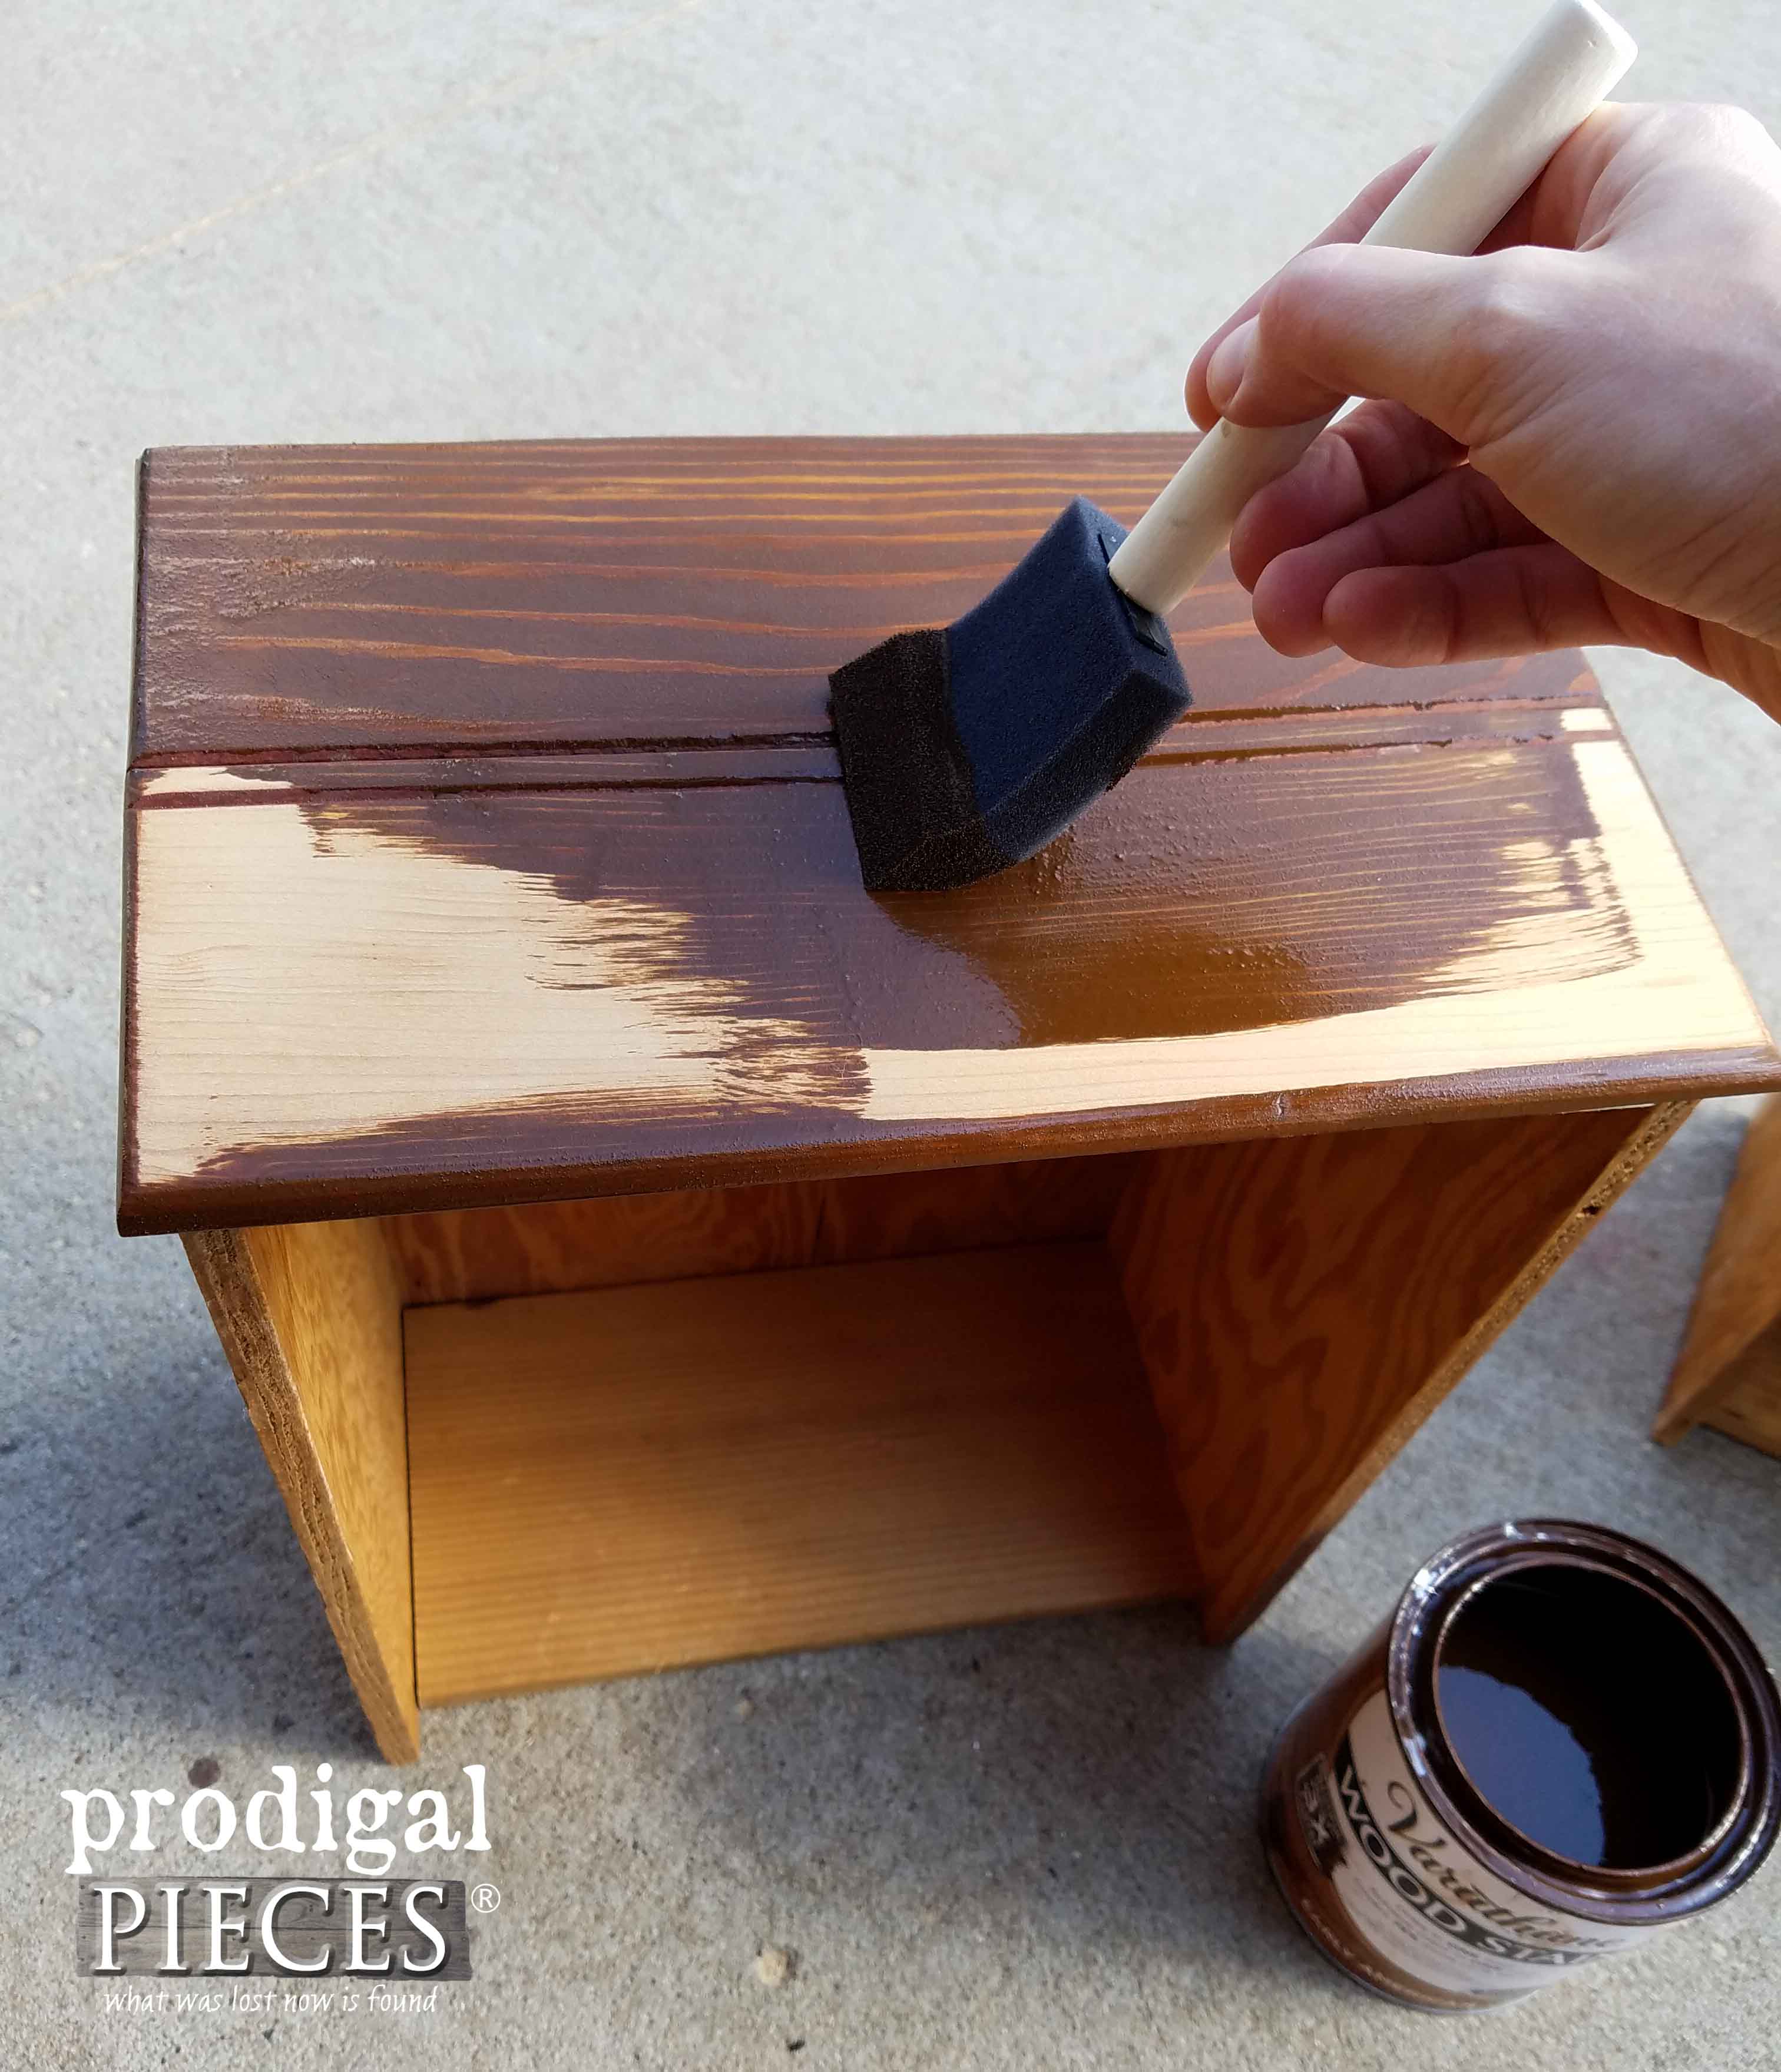 Staining Apothecary Cabinet Drawers | Prodigal Pieces | prodigalpieces.com